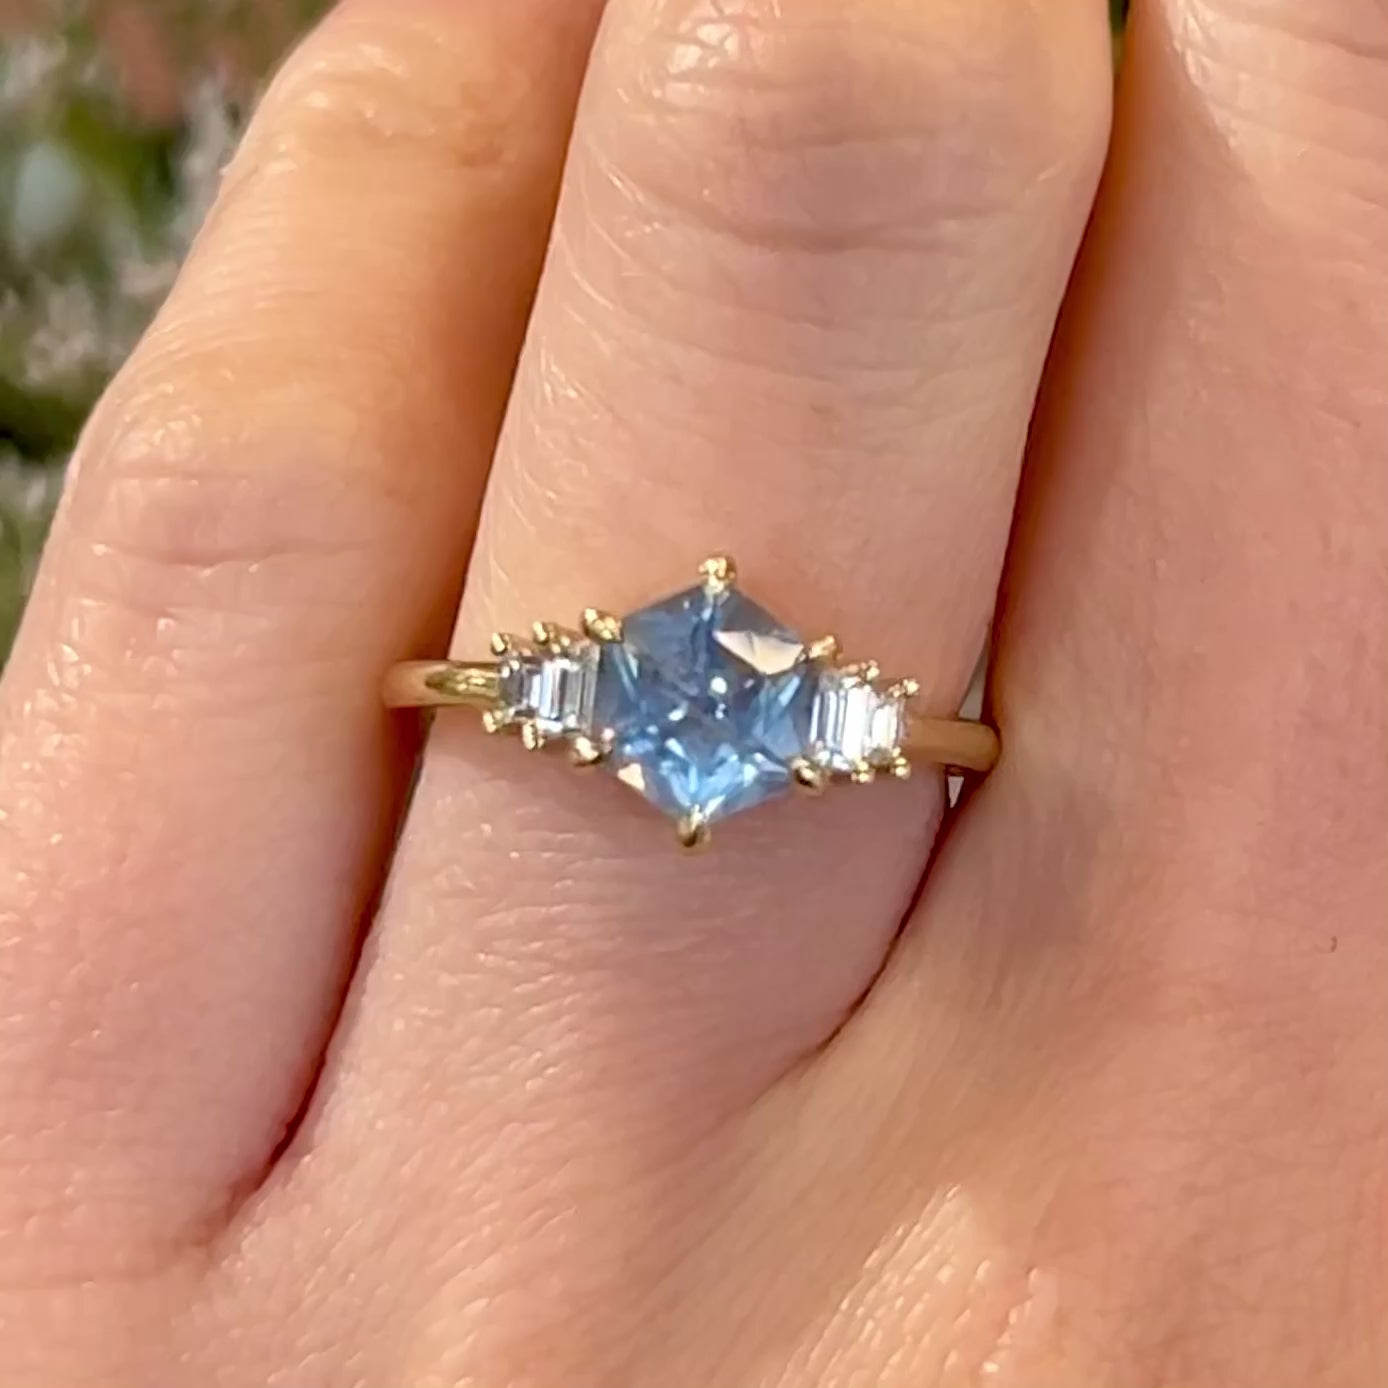 Video of Light blue Montana hexagon sapphire engagement ring with baguette diamonds set in 14k yellow gold on a hand